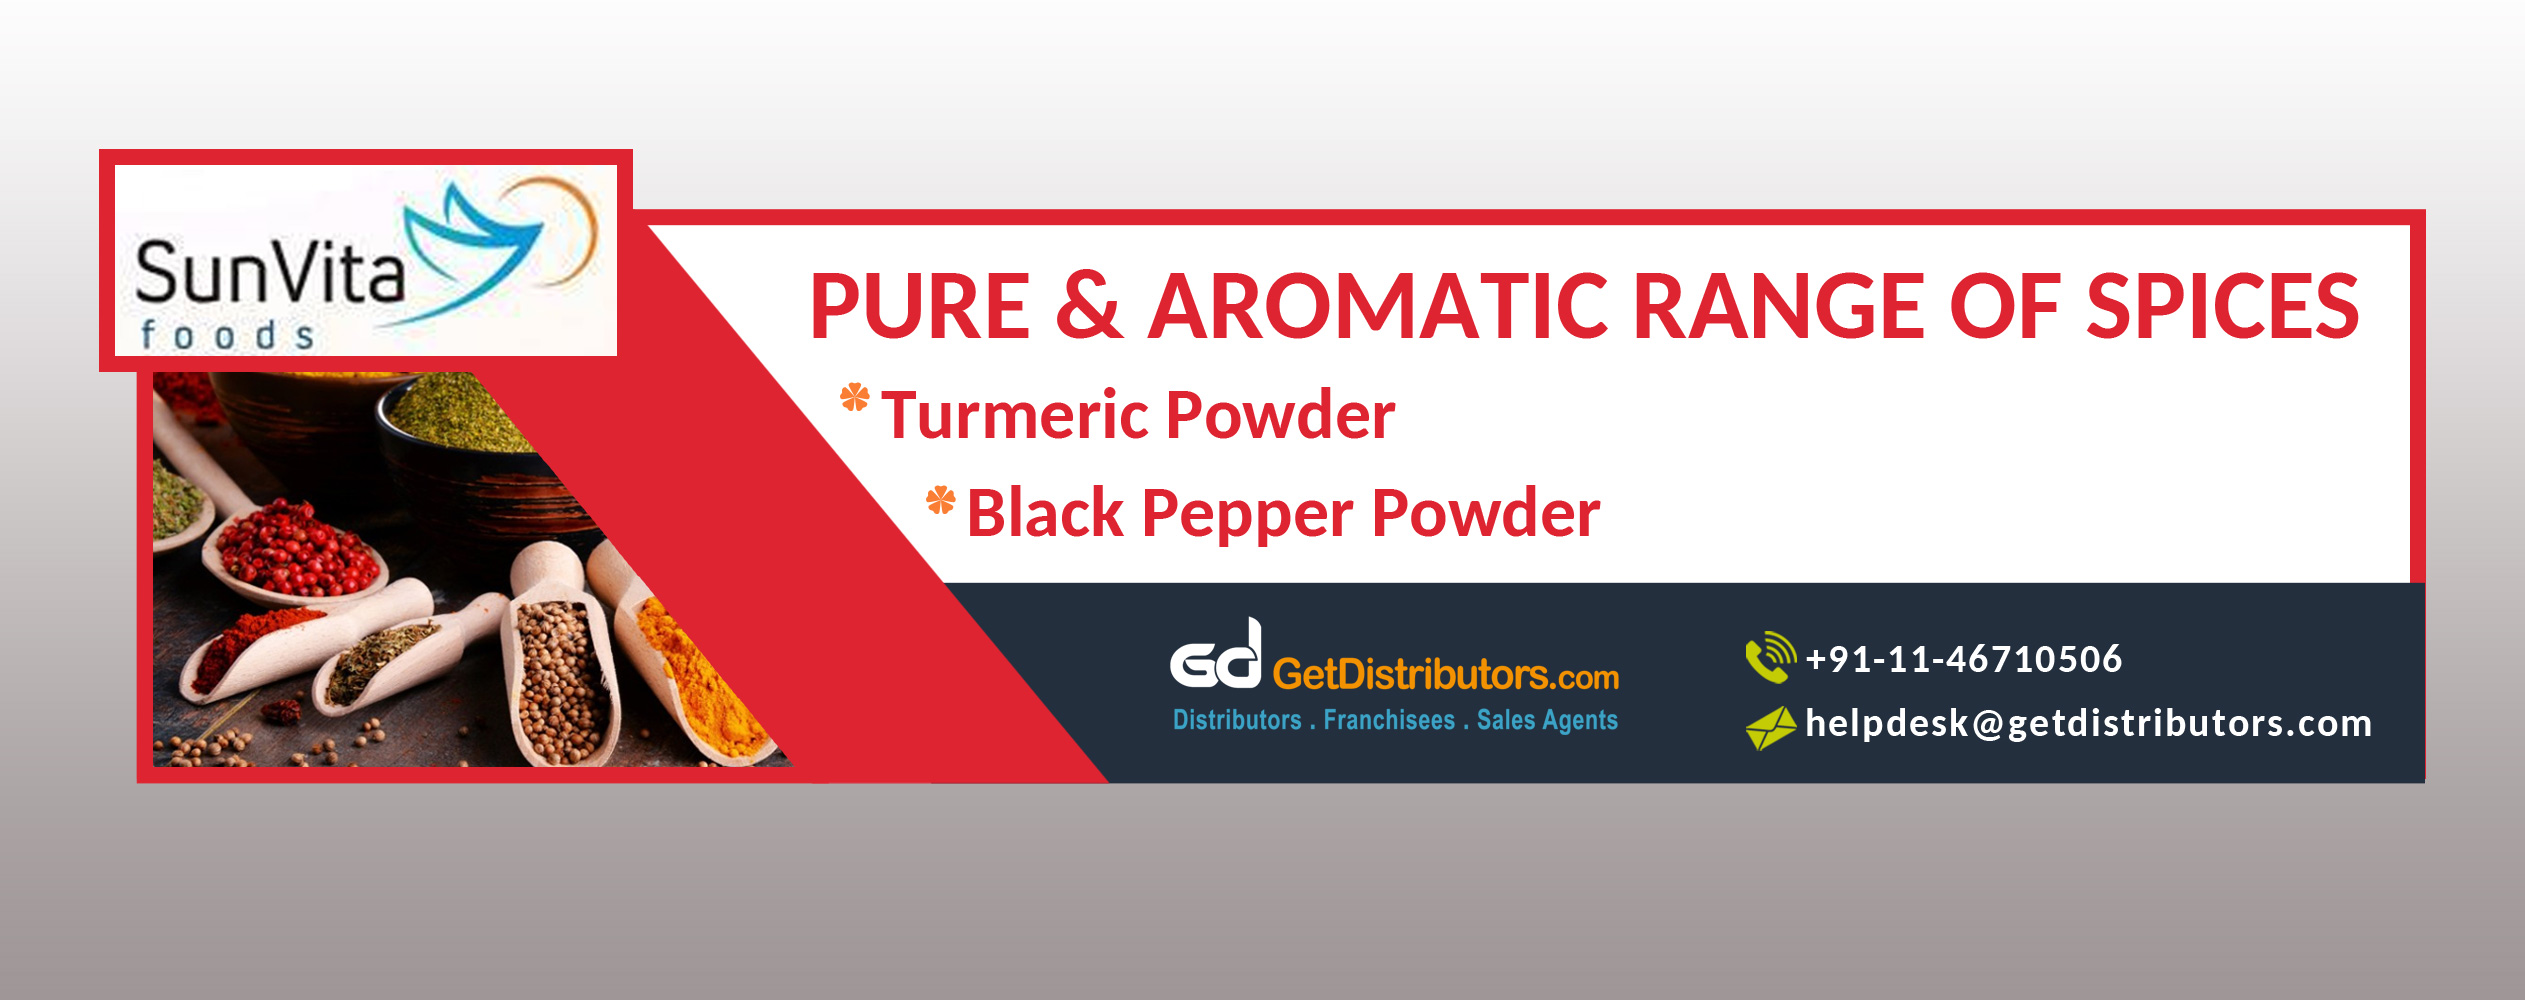 Pure & Aromatic Range of Spices